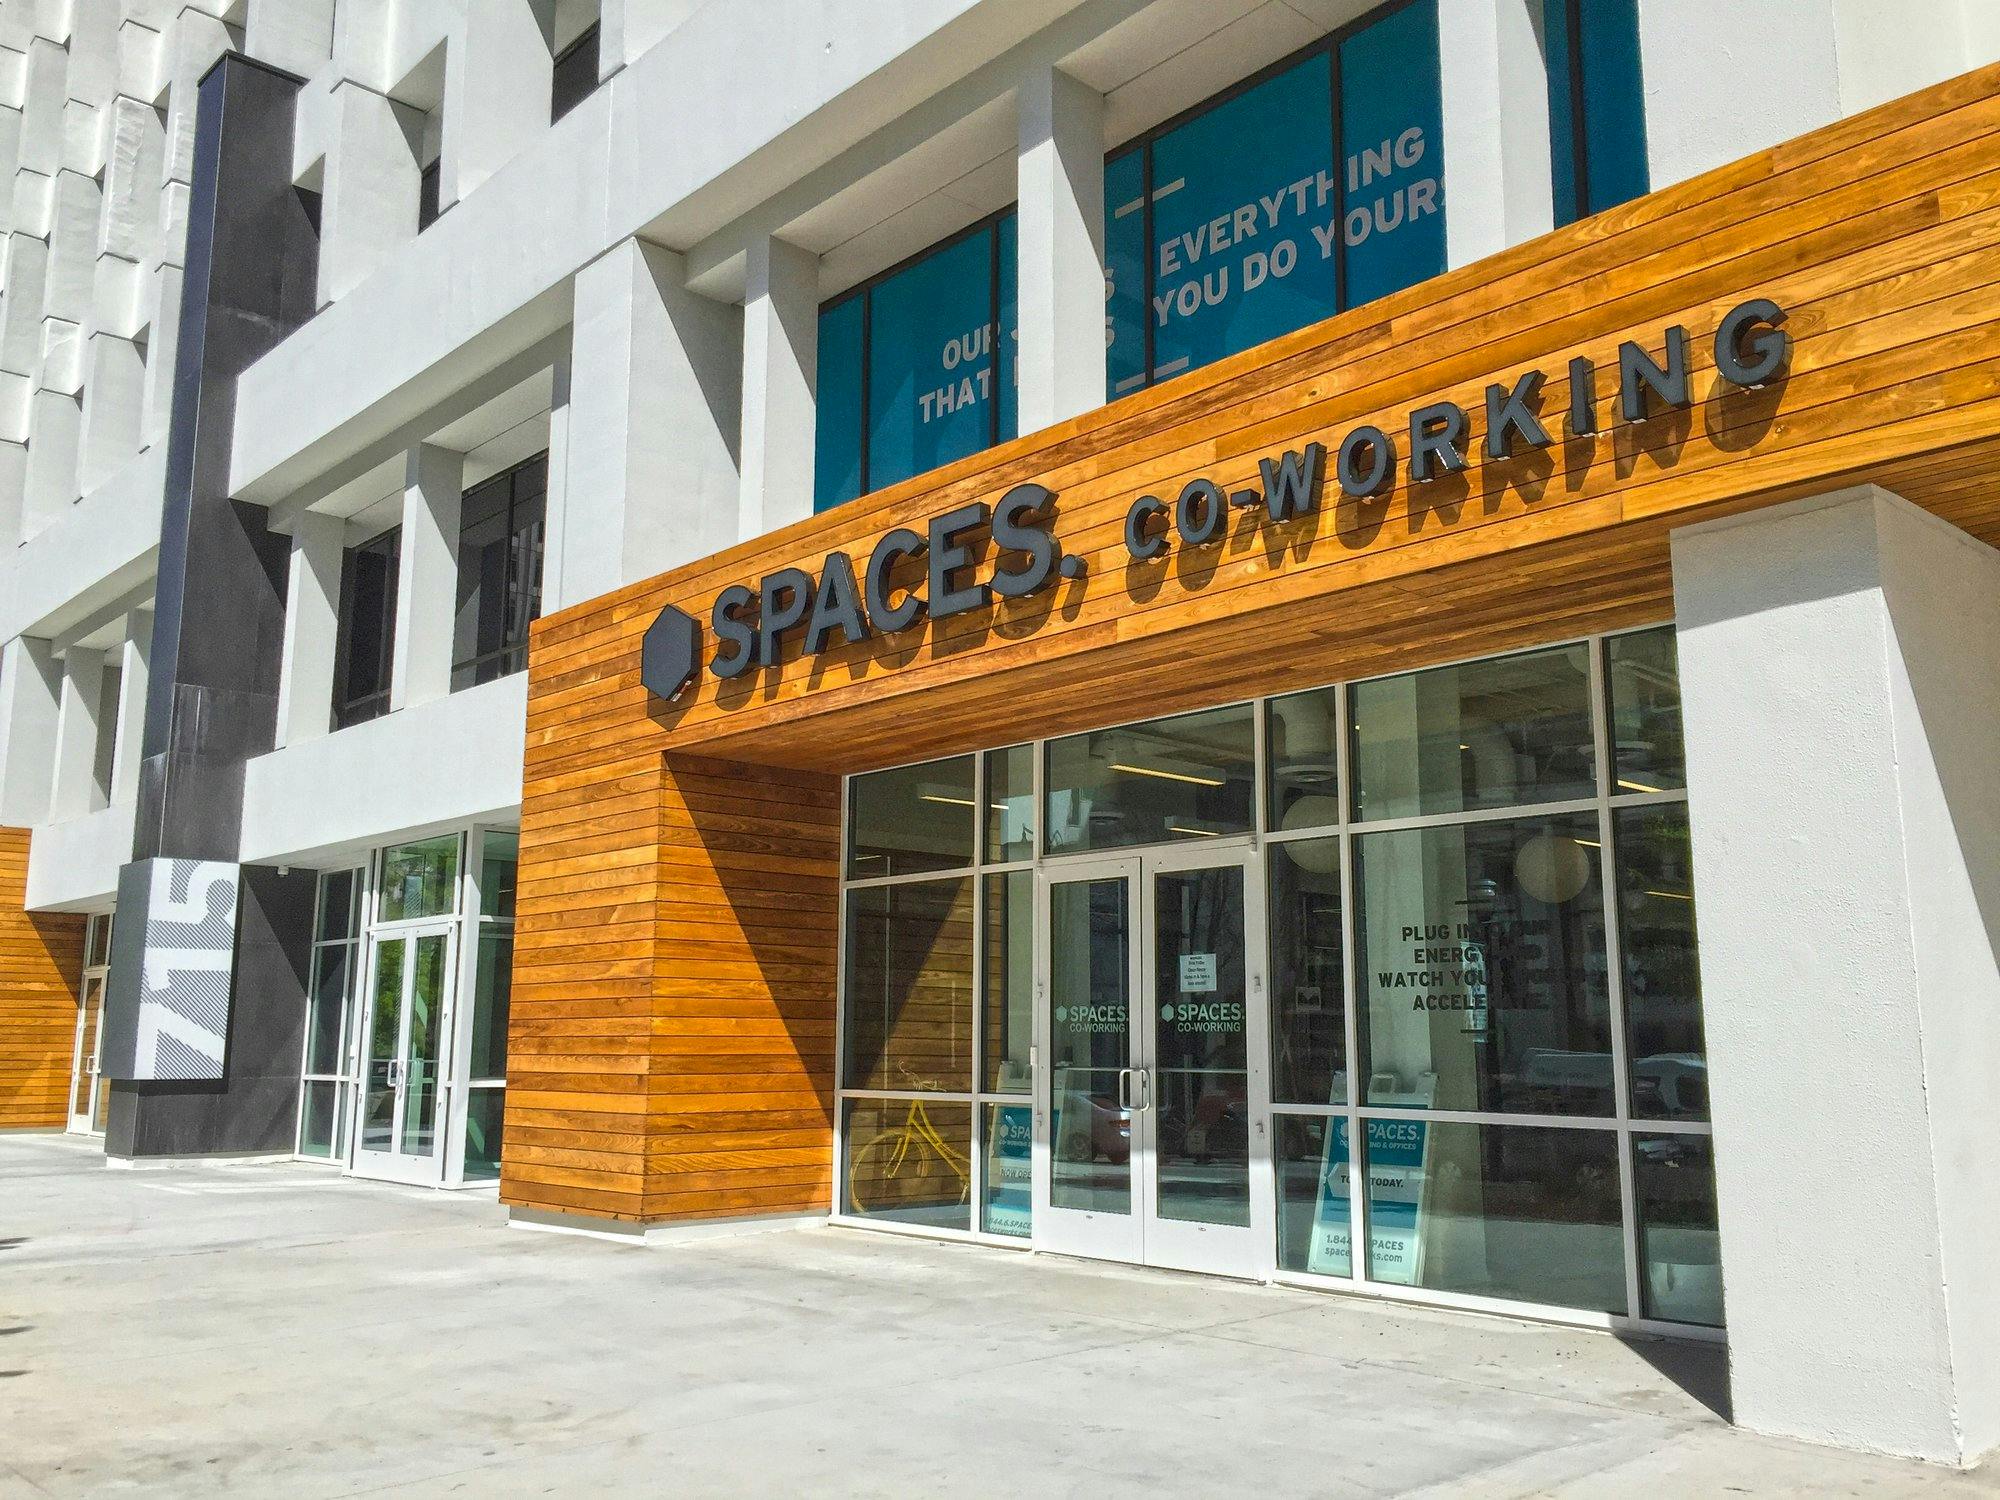 Exterior image of SPACES co-working entrance.